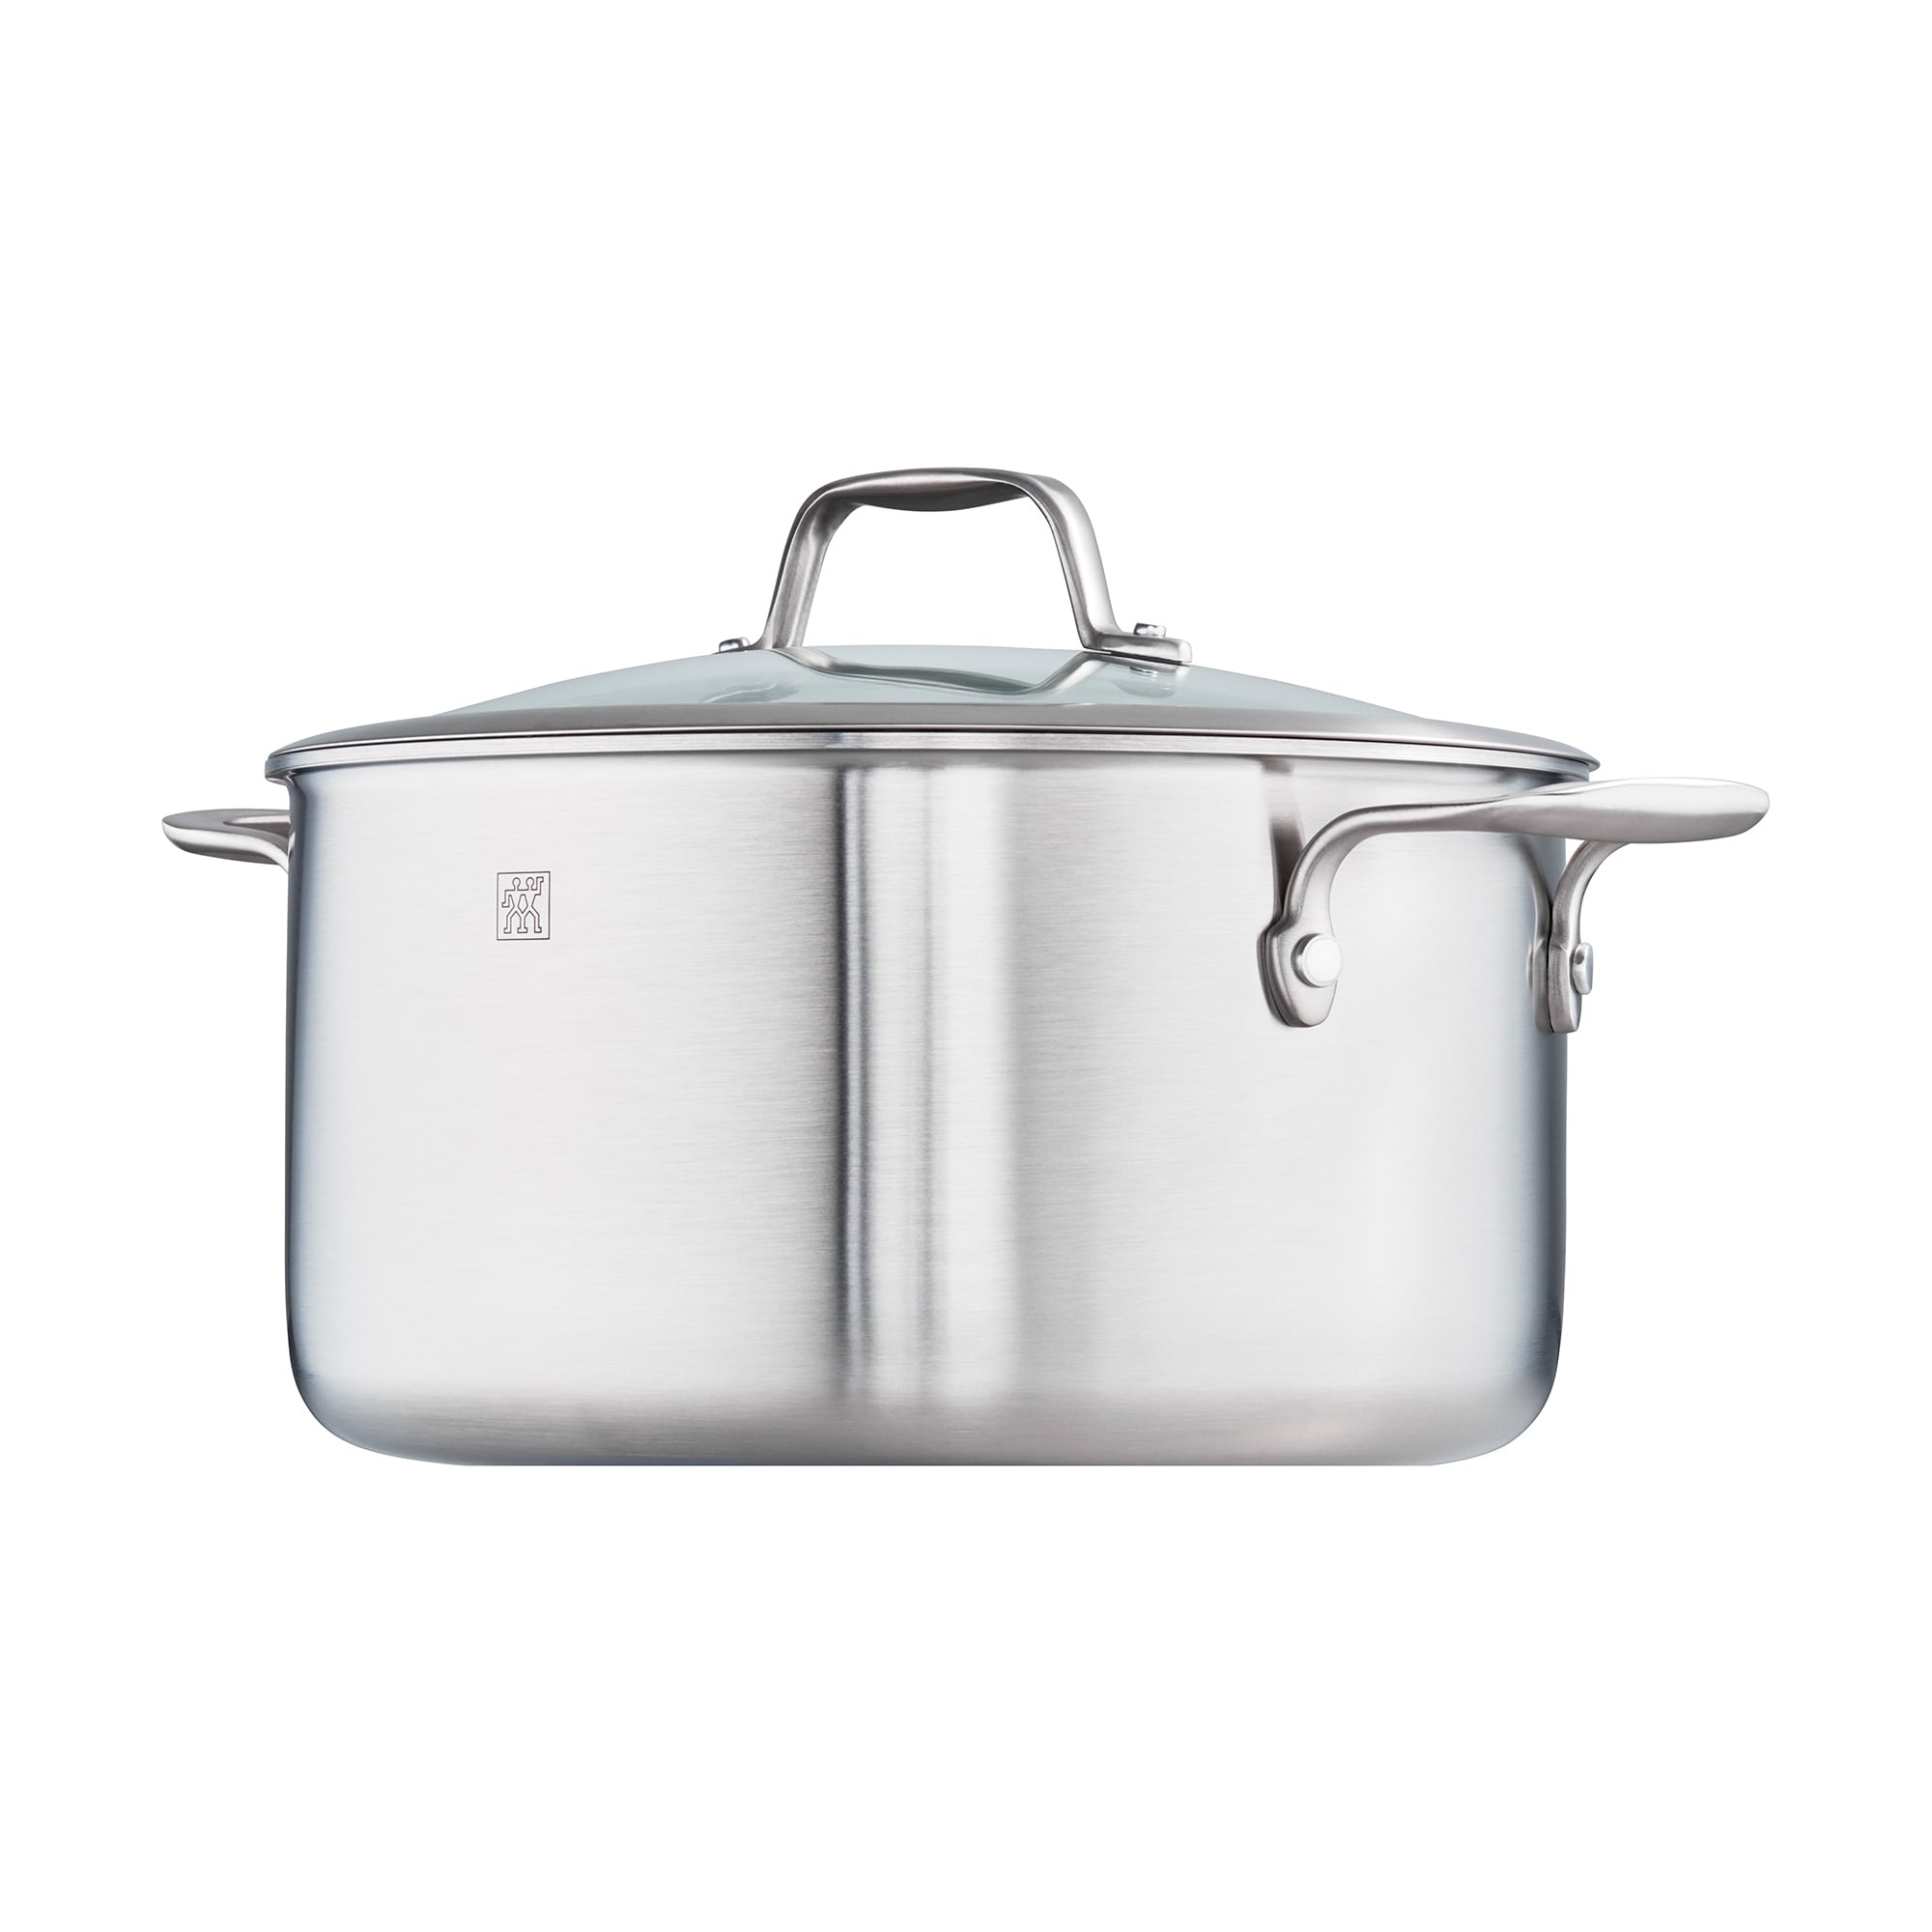 Henckels Clad H3 6-Qt Stainless Steel Dutch Oven With Lid